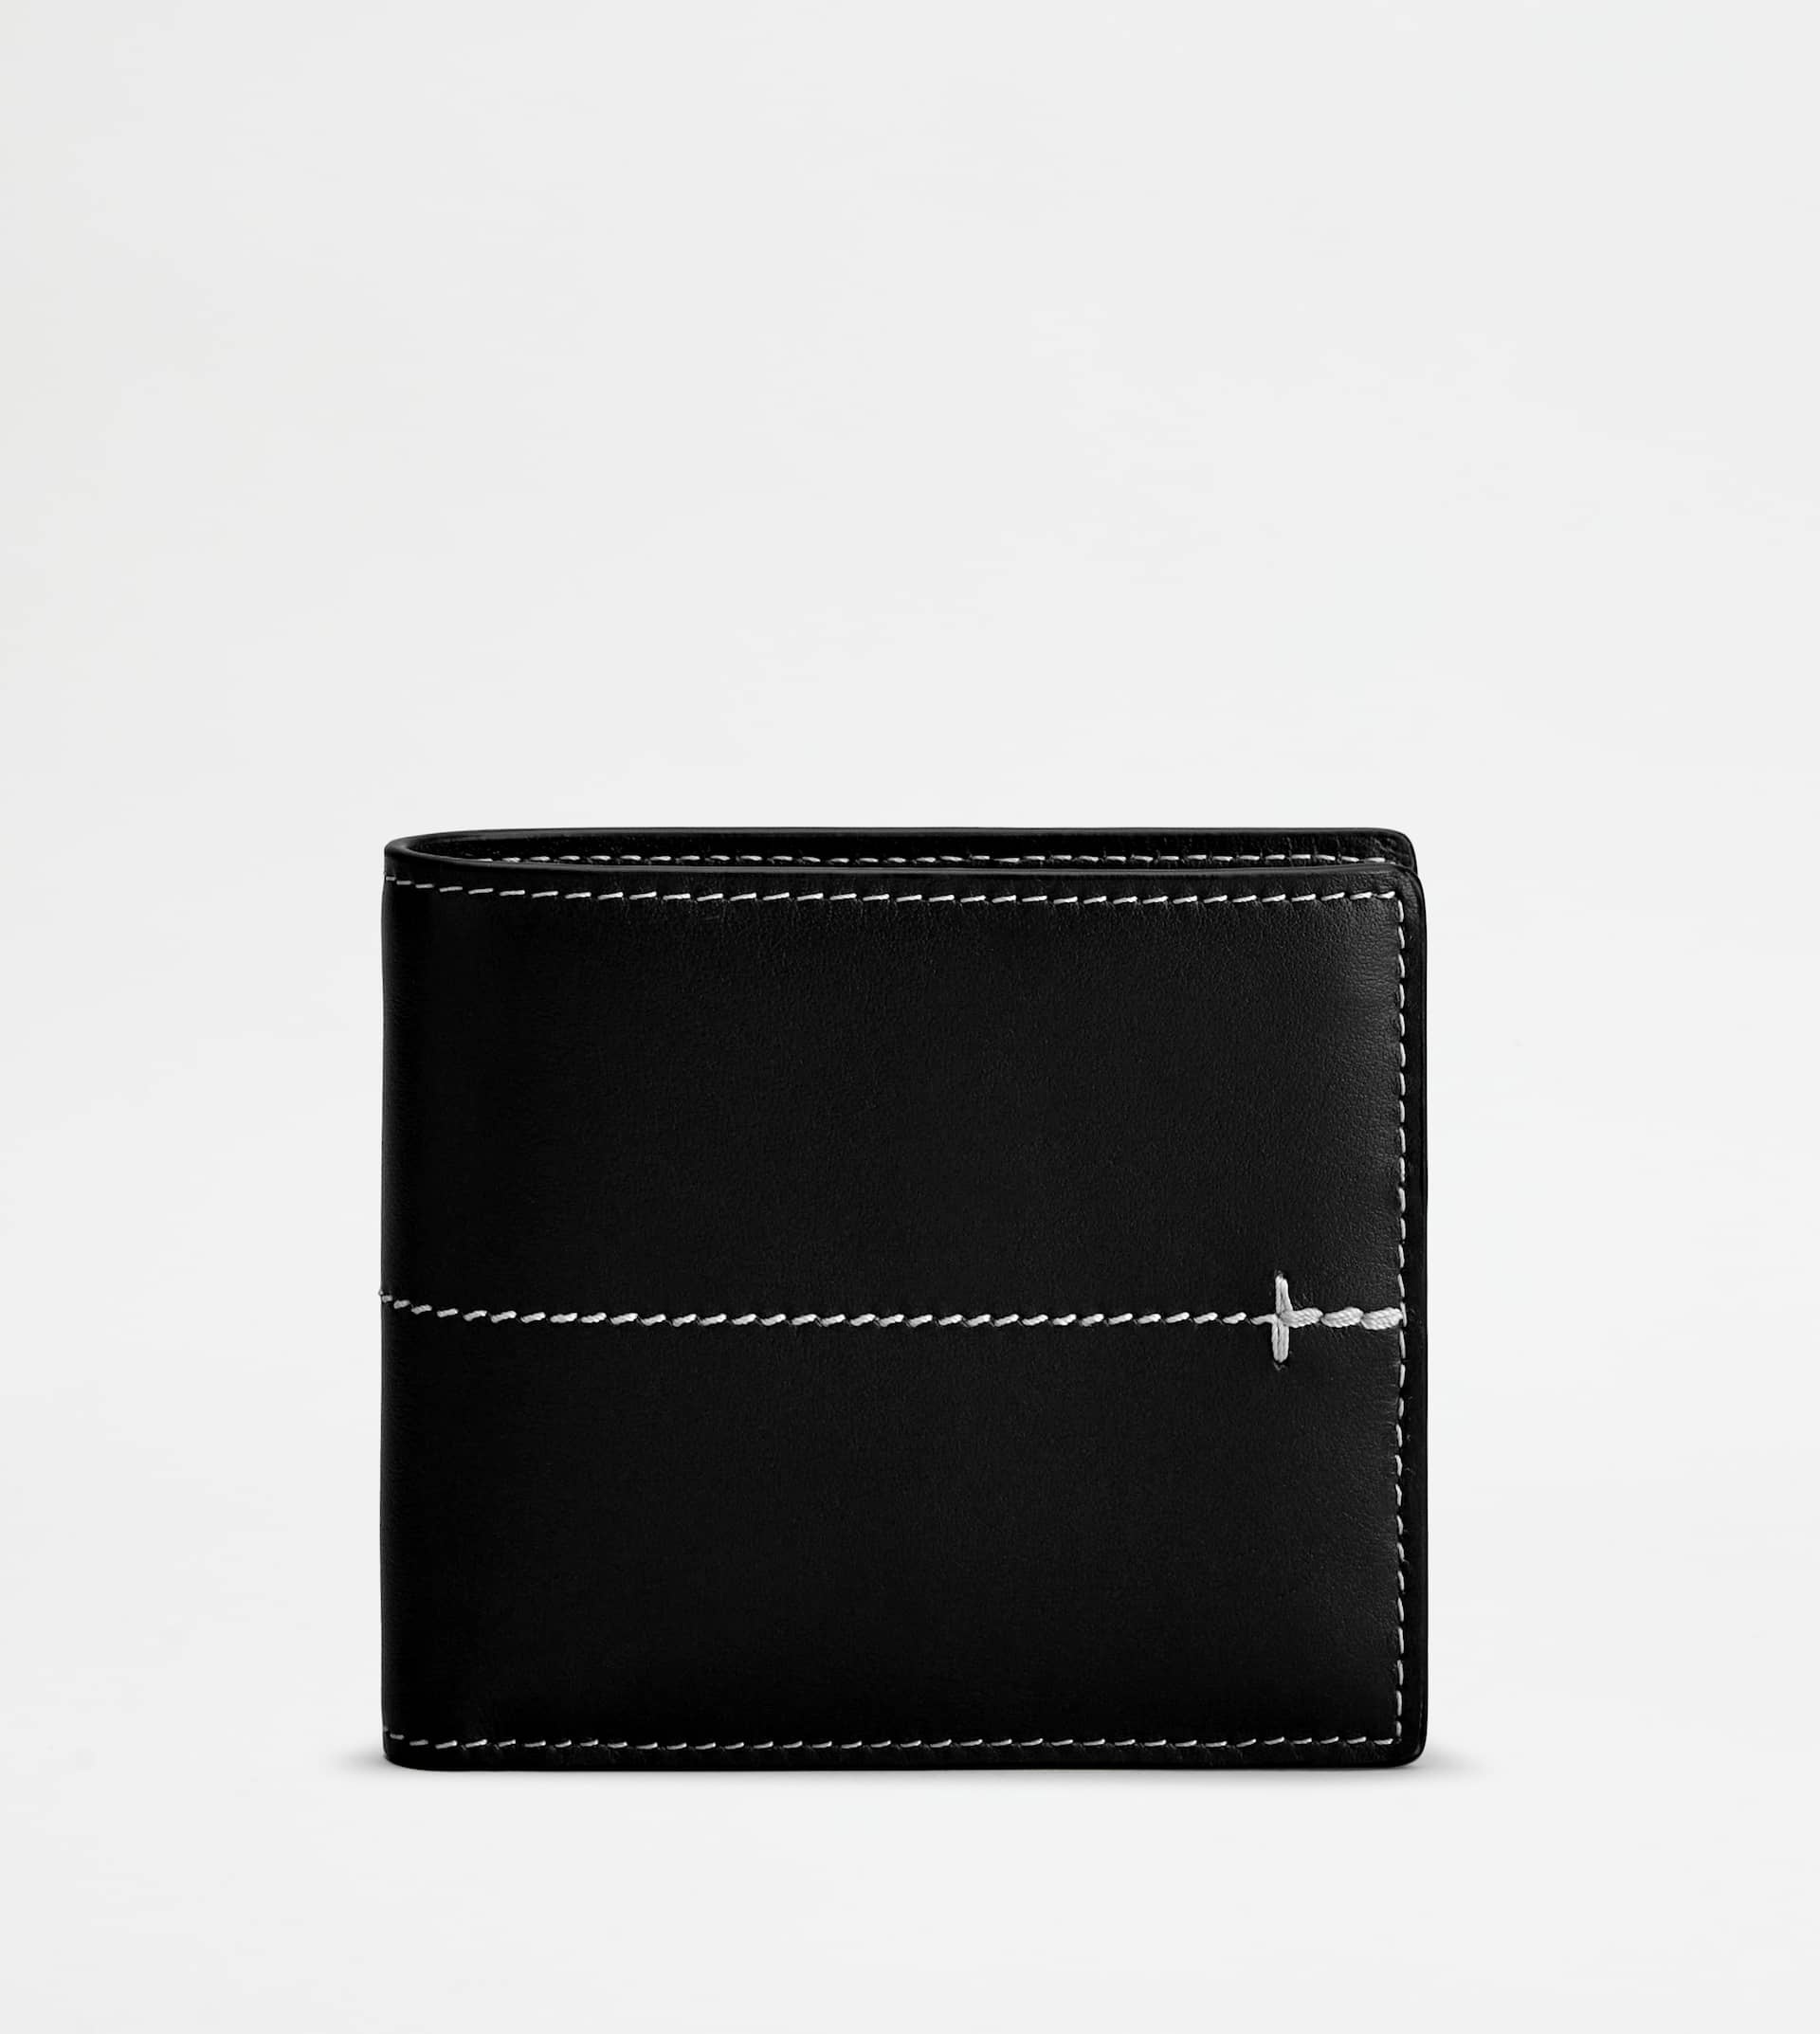 WALLET IN LEATHER - BLACK - 1